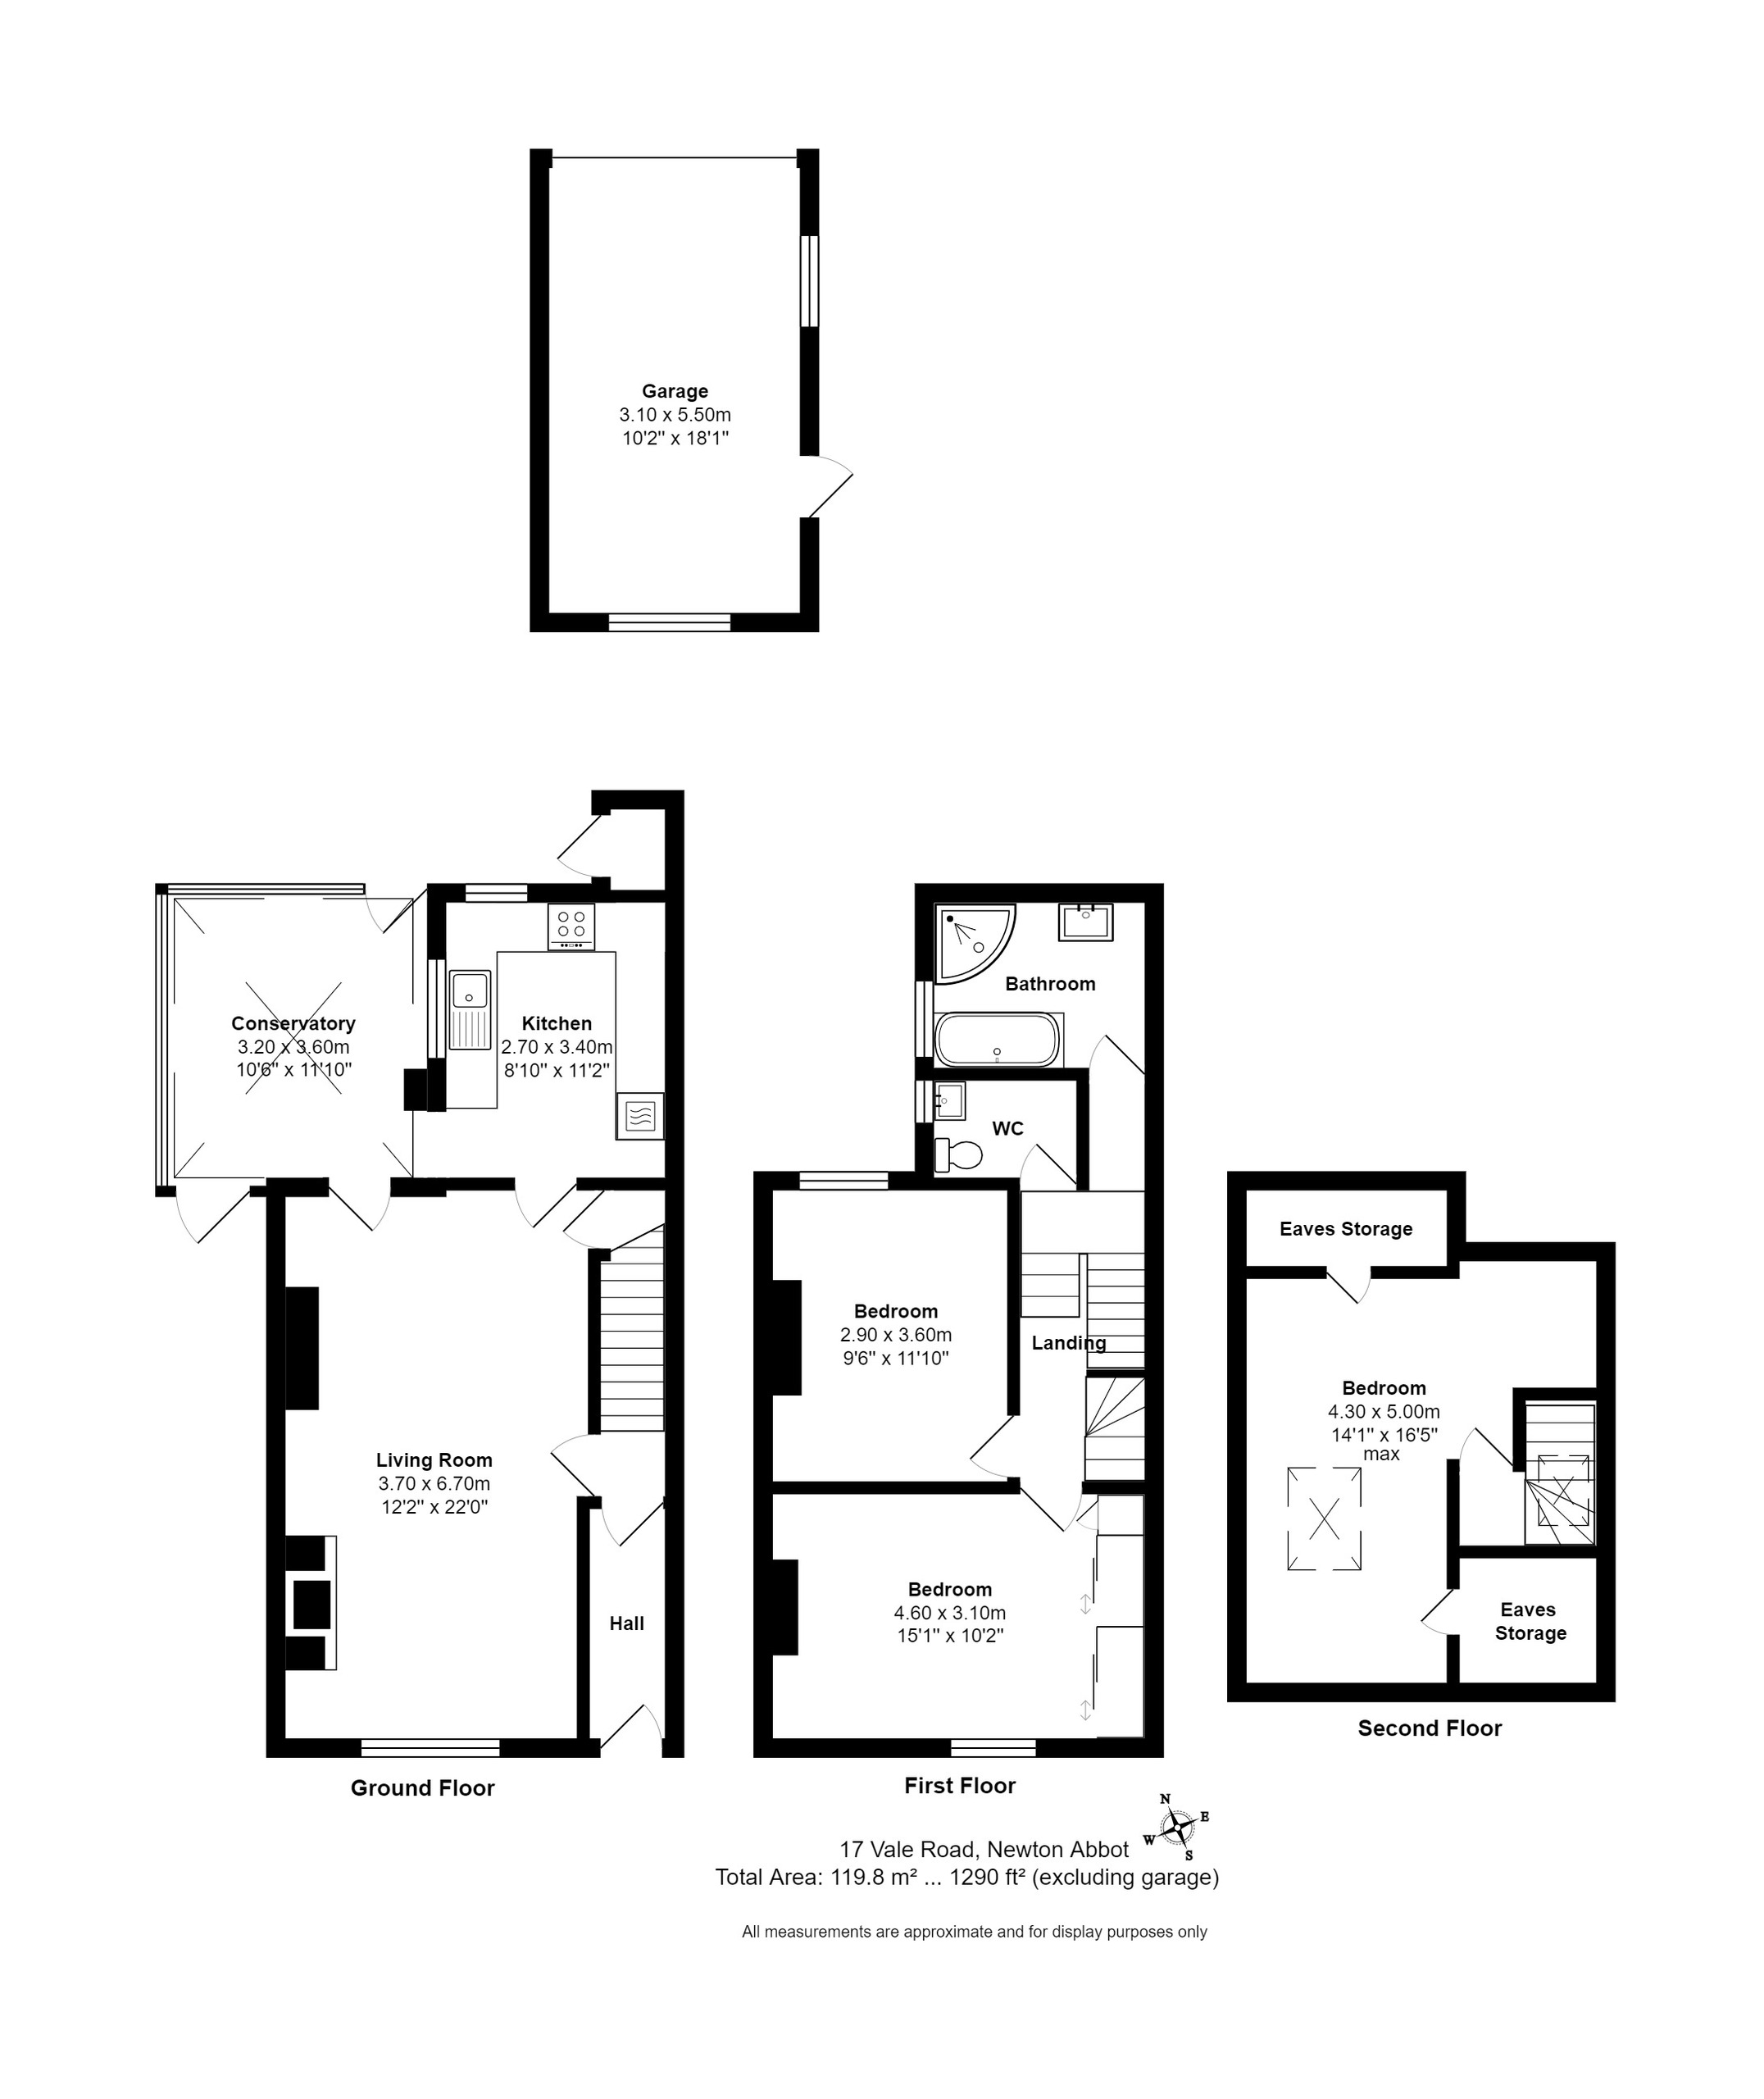 3 bed semi-detached house for sale in Decoy, Newton Abbot - Property floorplan